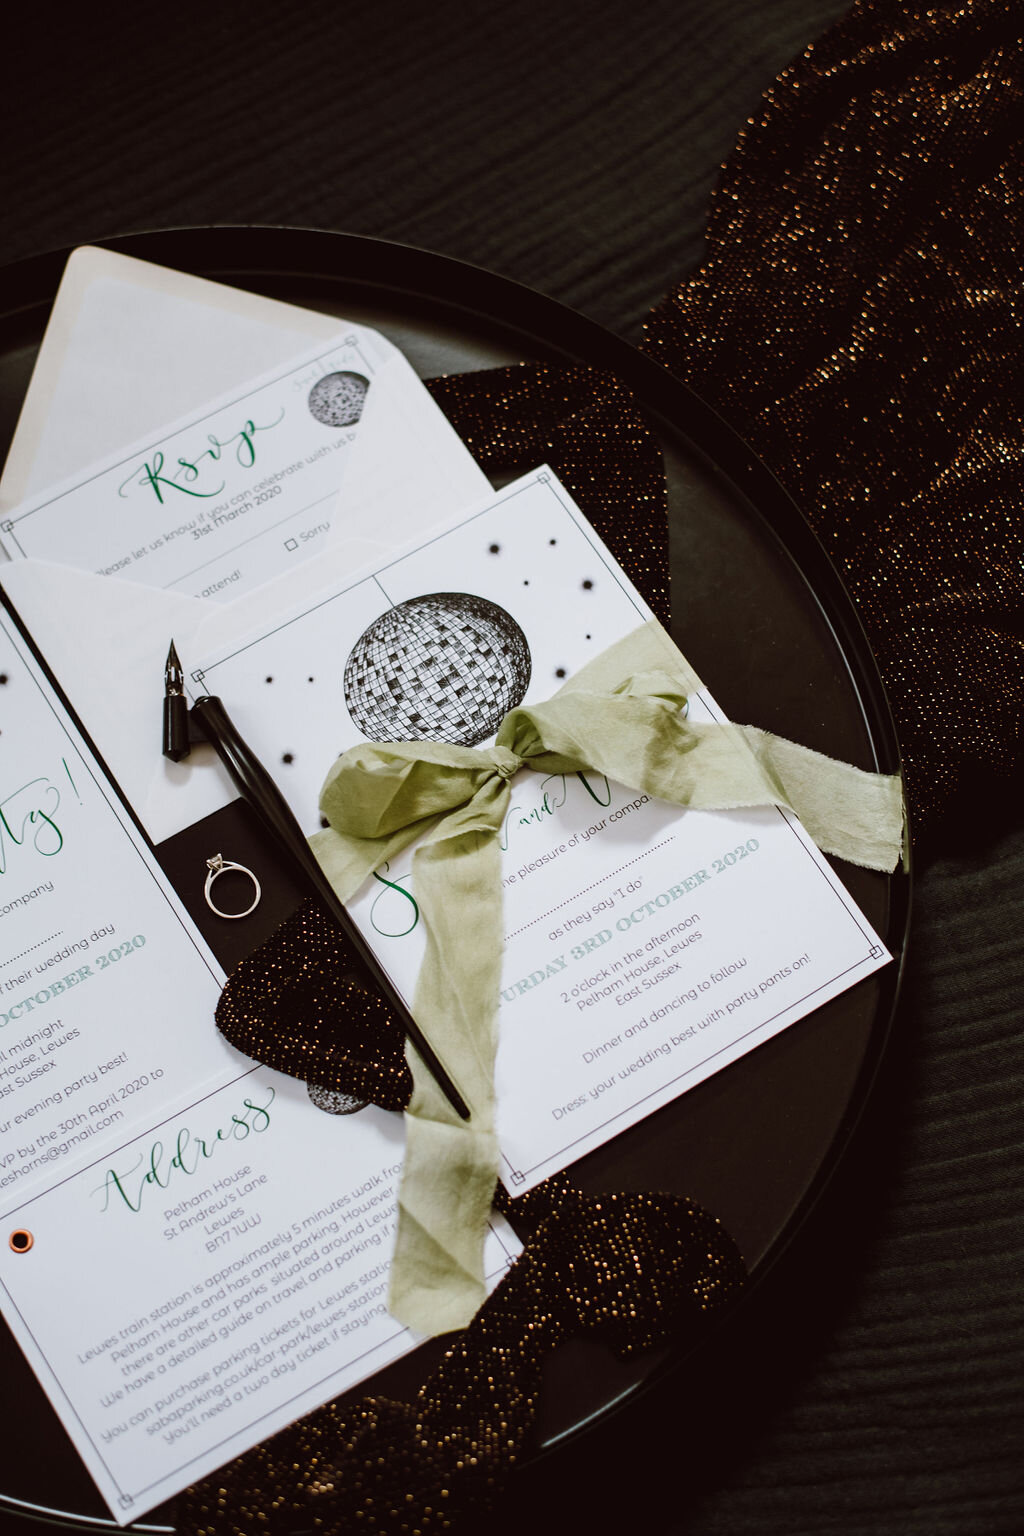 Disco ball invites - eco friendly invitations made from recycled paper - Pelham House wedding stationery - forest green.jpg